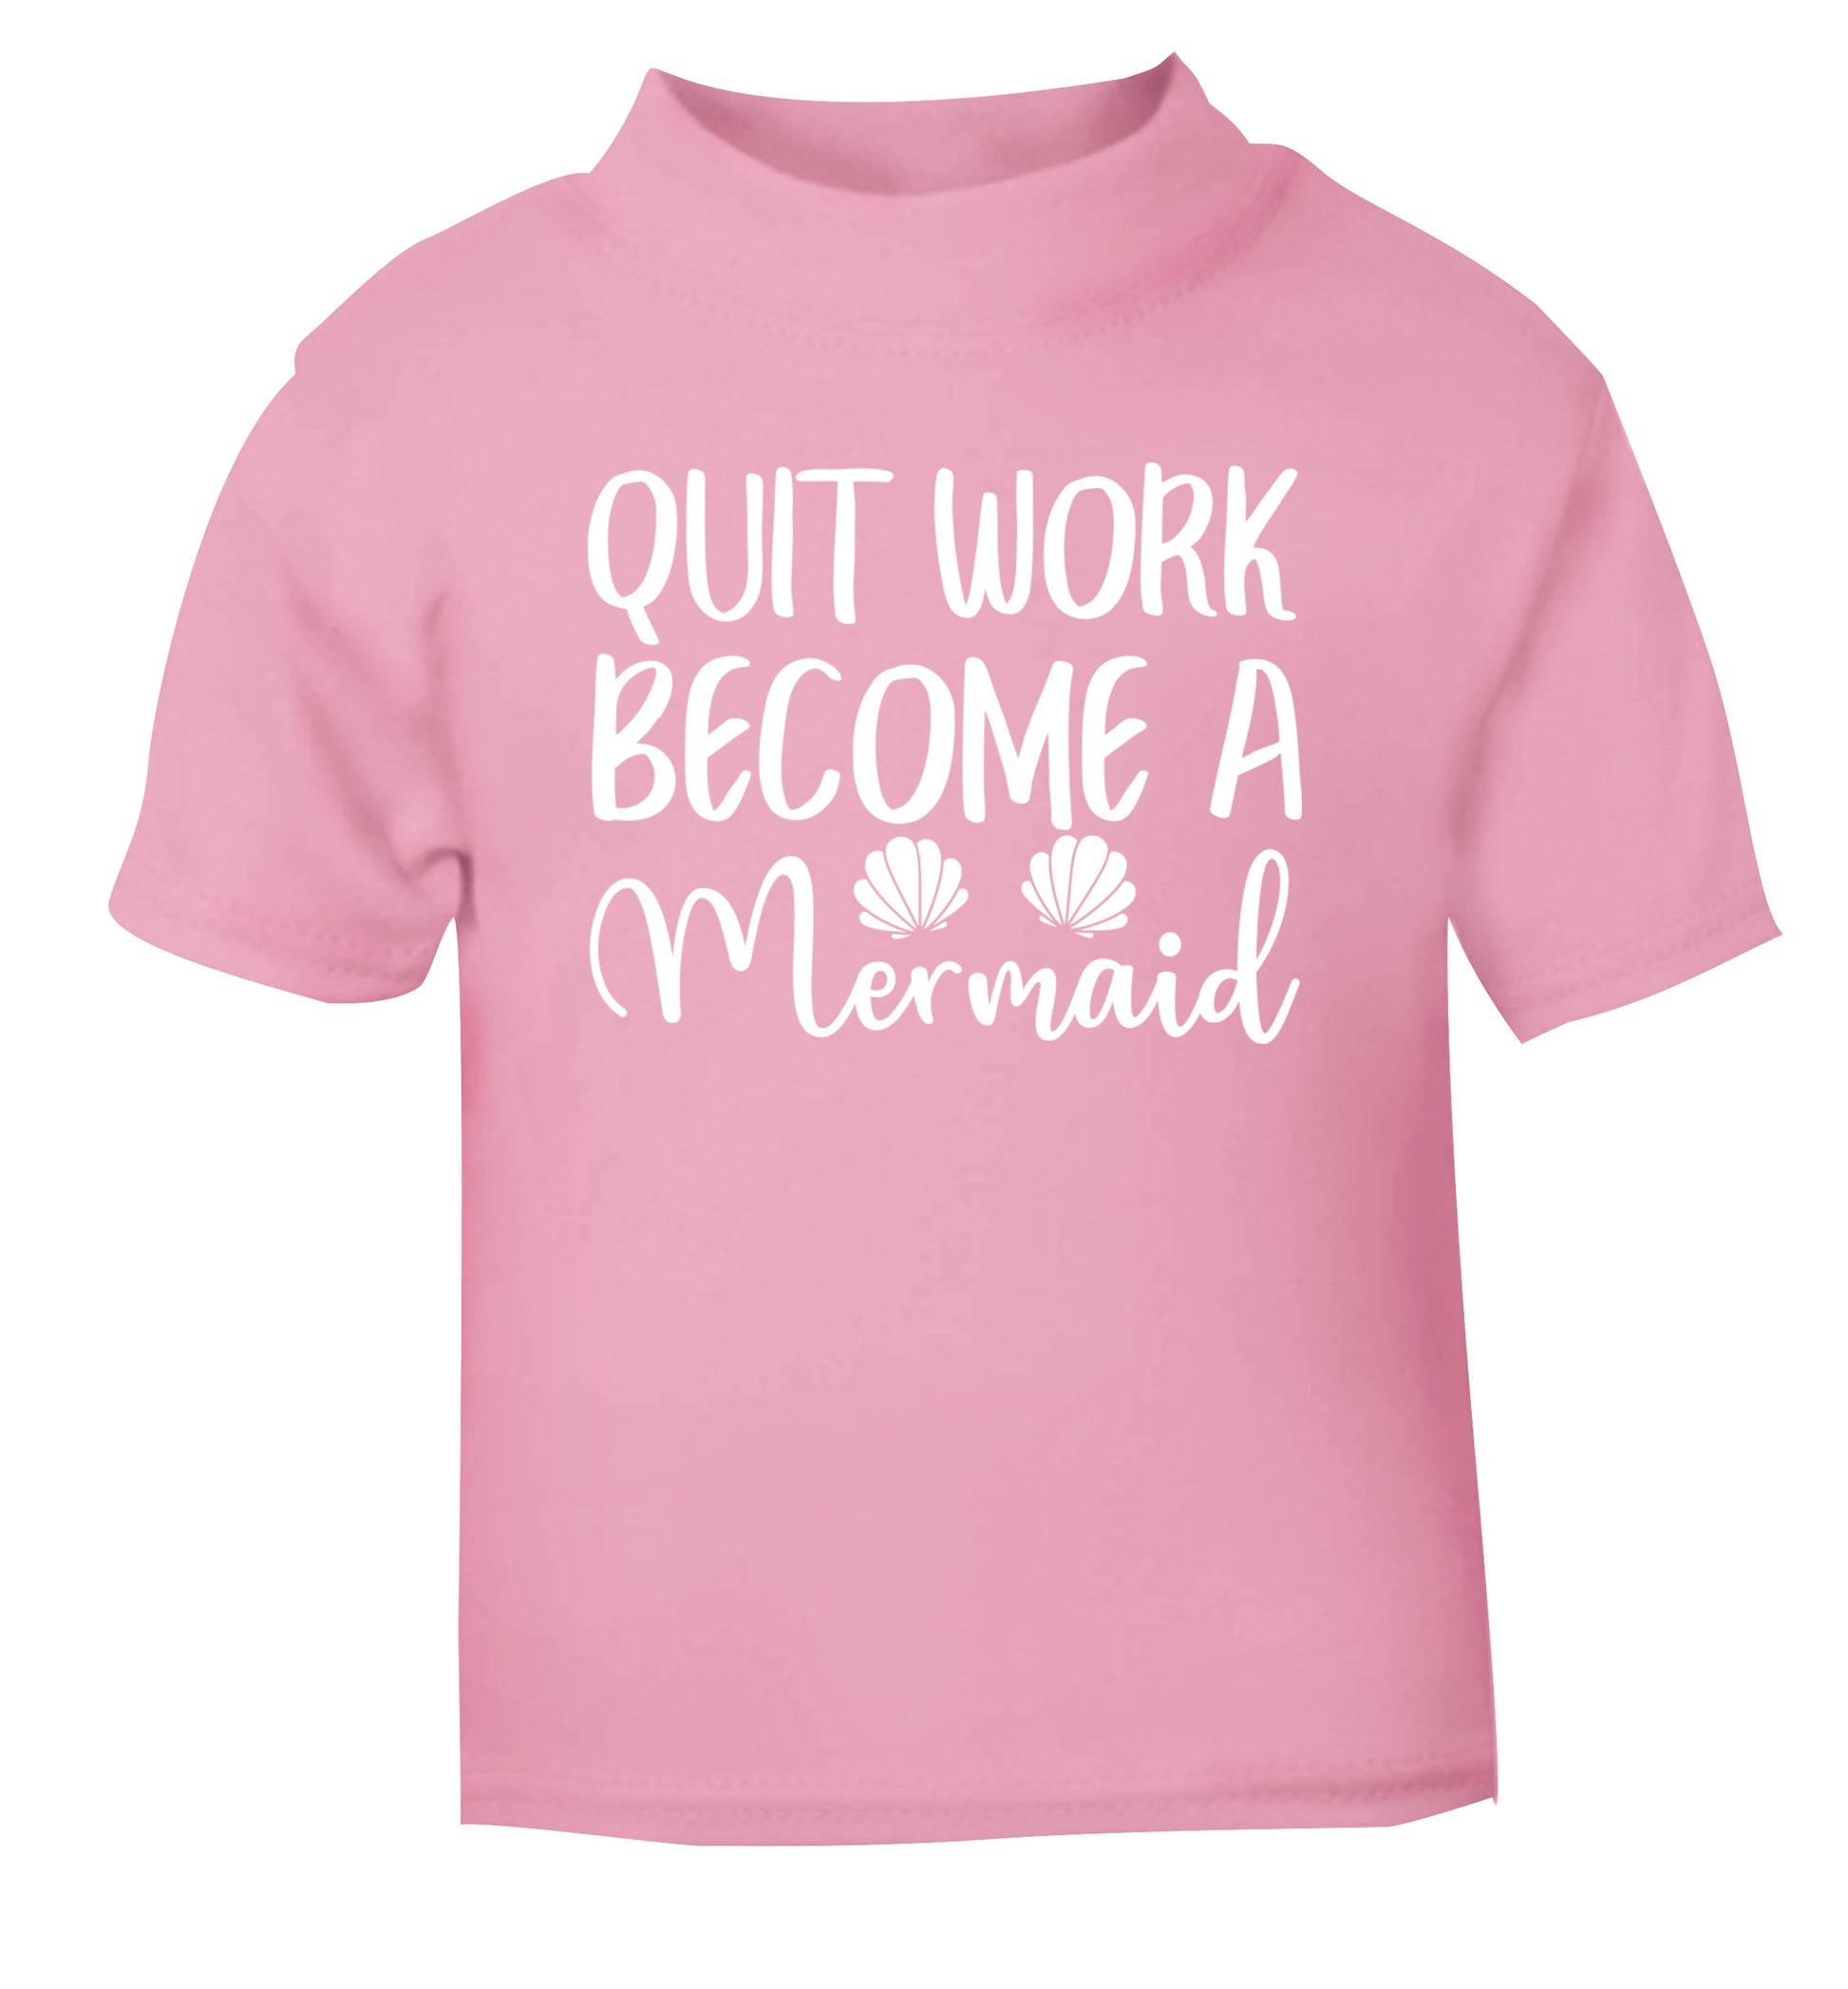 Quit work become a mermaid light pink Baby Toddler Tshirt 2 Years